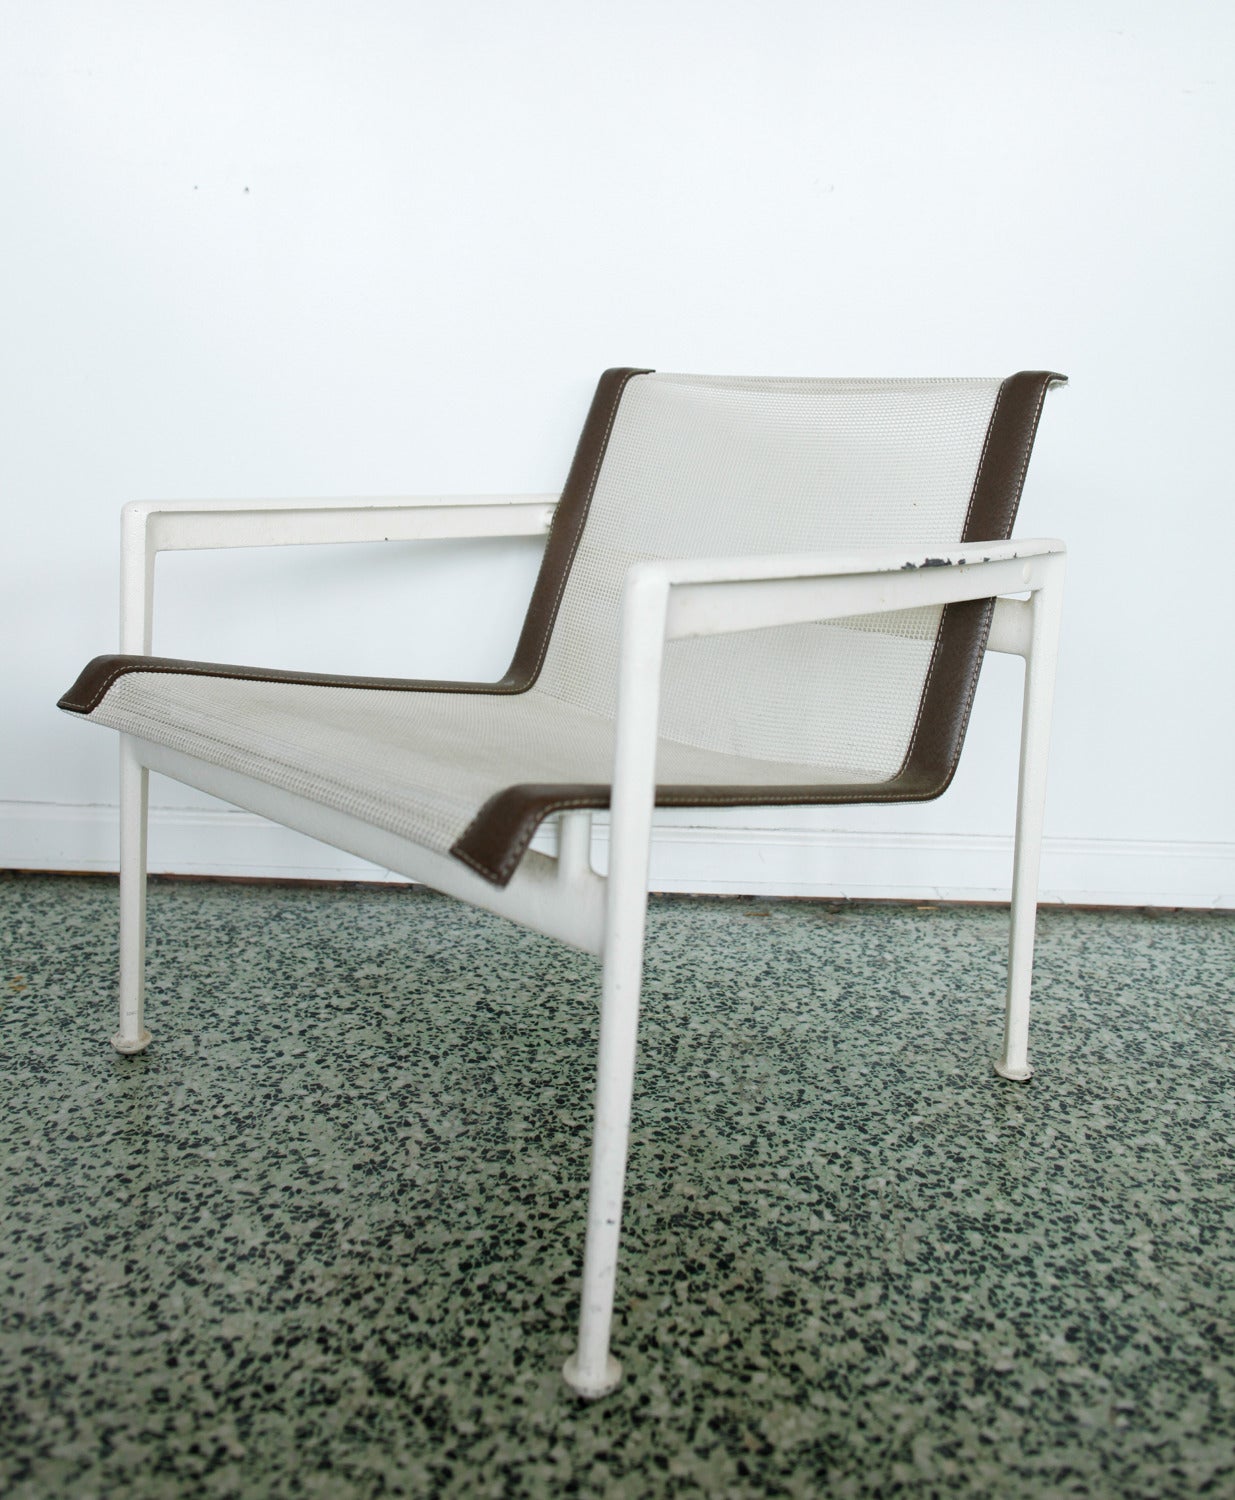 This set of 1966-45 armchairs are part of the collection that Richard Schultz designed in 1966 at the request of Florence Knoll, who wanted well-designed outdoor furnishings that would withstand the corrosive salt air at her home in Florida. White